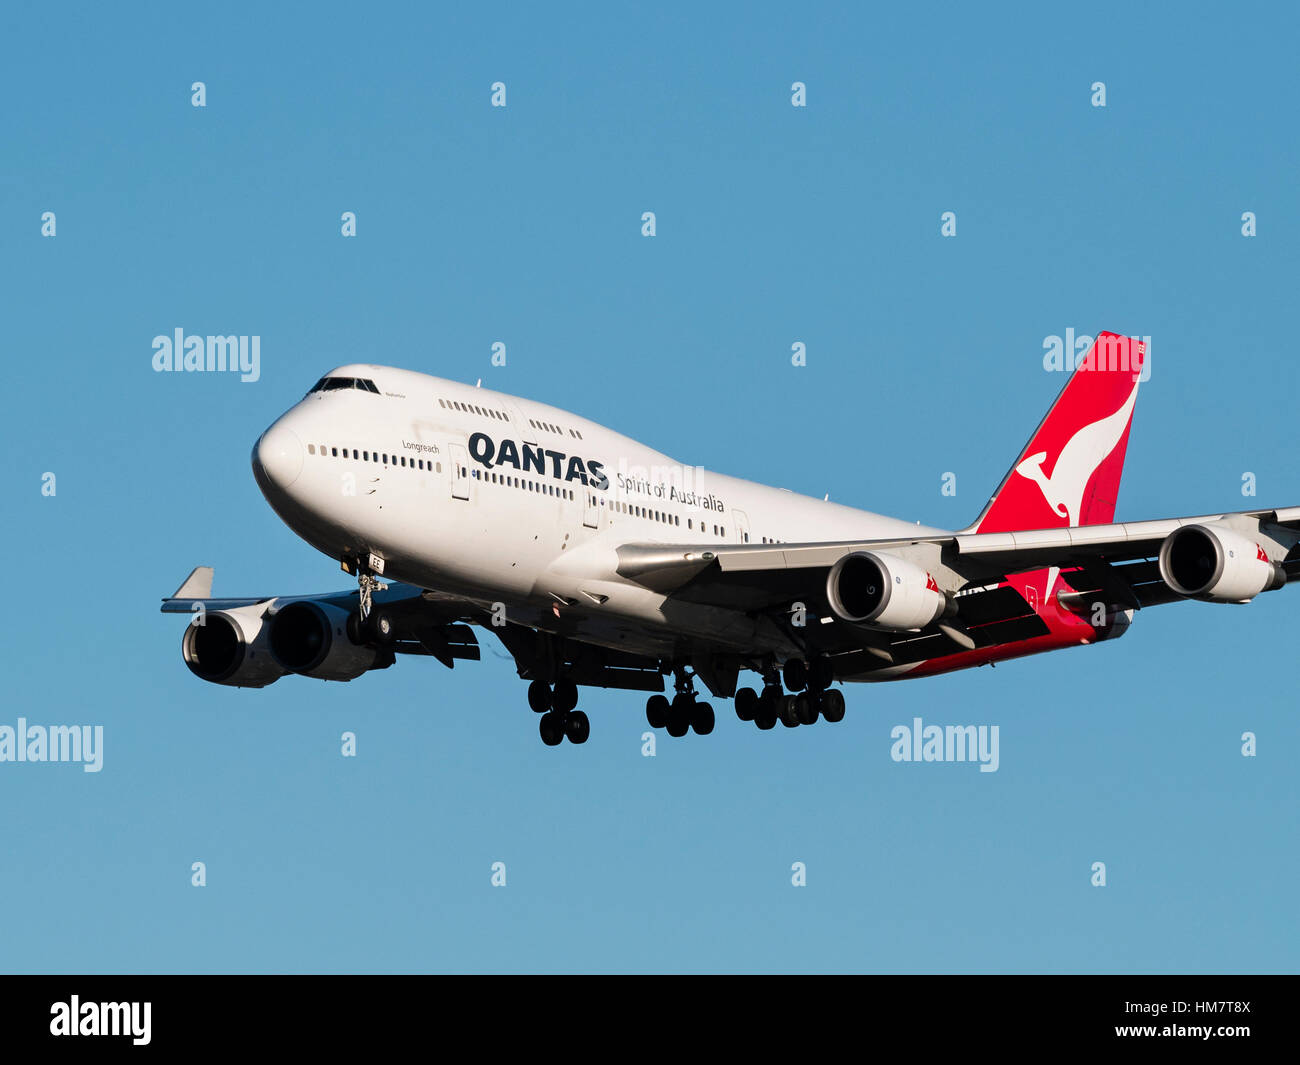 Qantas plane airplane Boeing 747 (747-438ER) wide-body jumbo jet airliner  final approach landing Vancouver International Airport Stock Photo